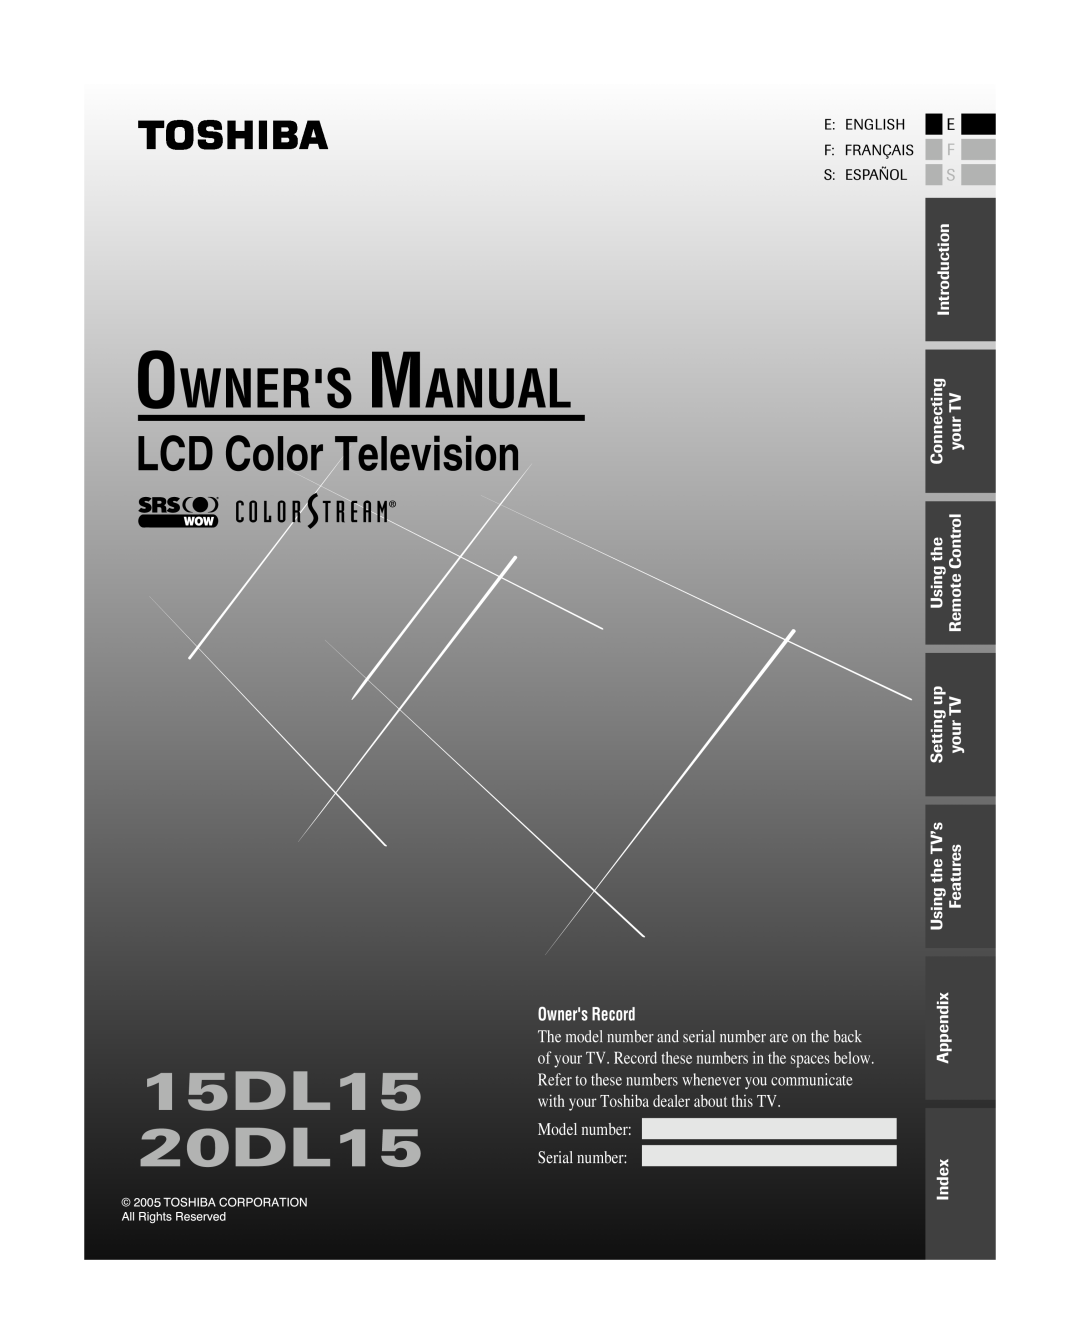 Toshiba owner manual 15DL15 20DL15, LCD Color Television, Owners Record, Model number Serial number, Introduction 